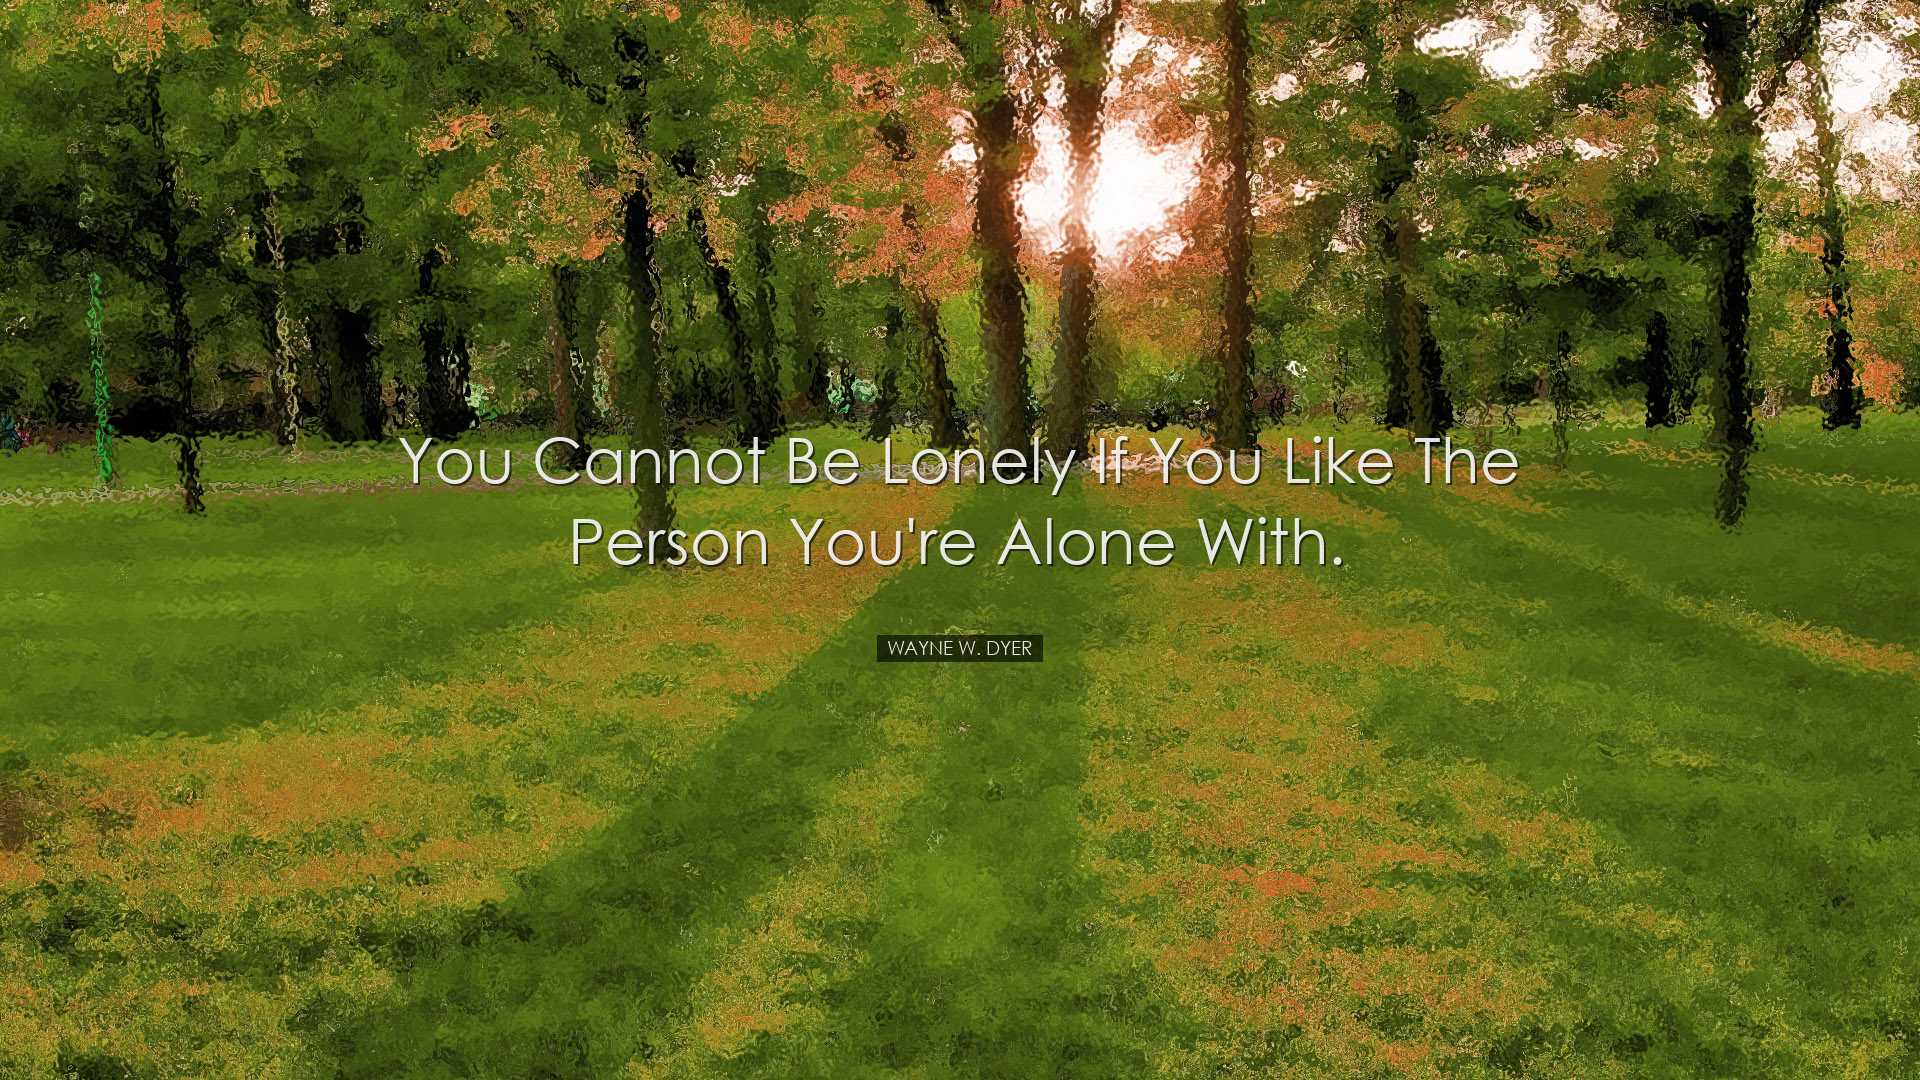 You cannot be lonely if you like the person you're alone with. - W